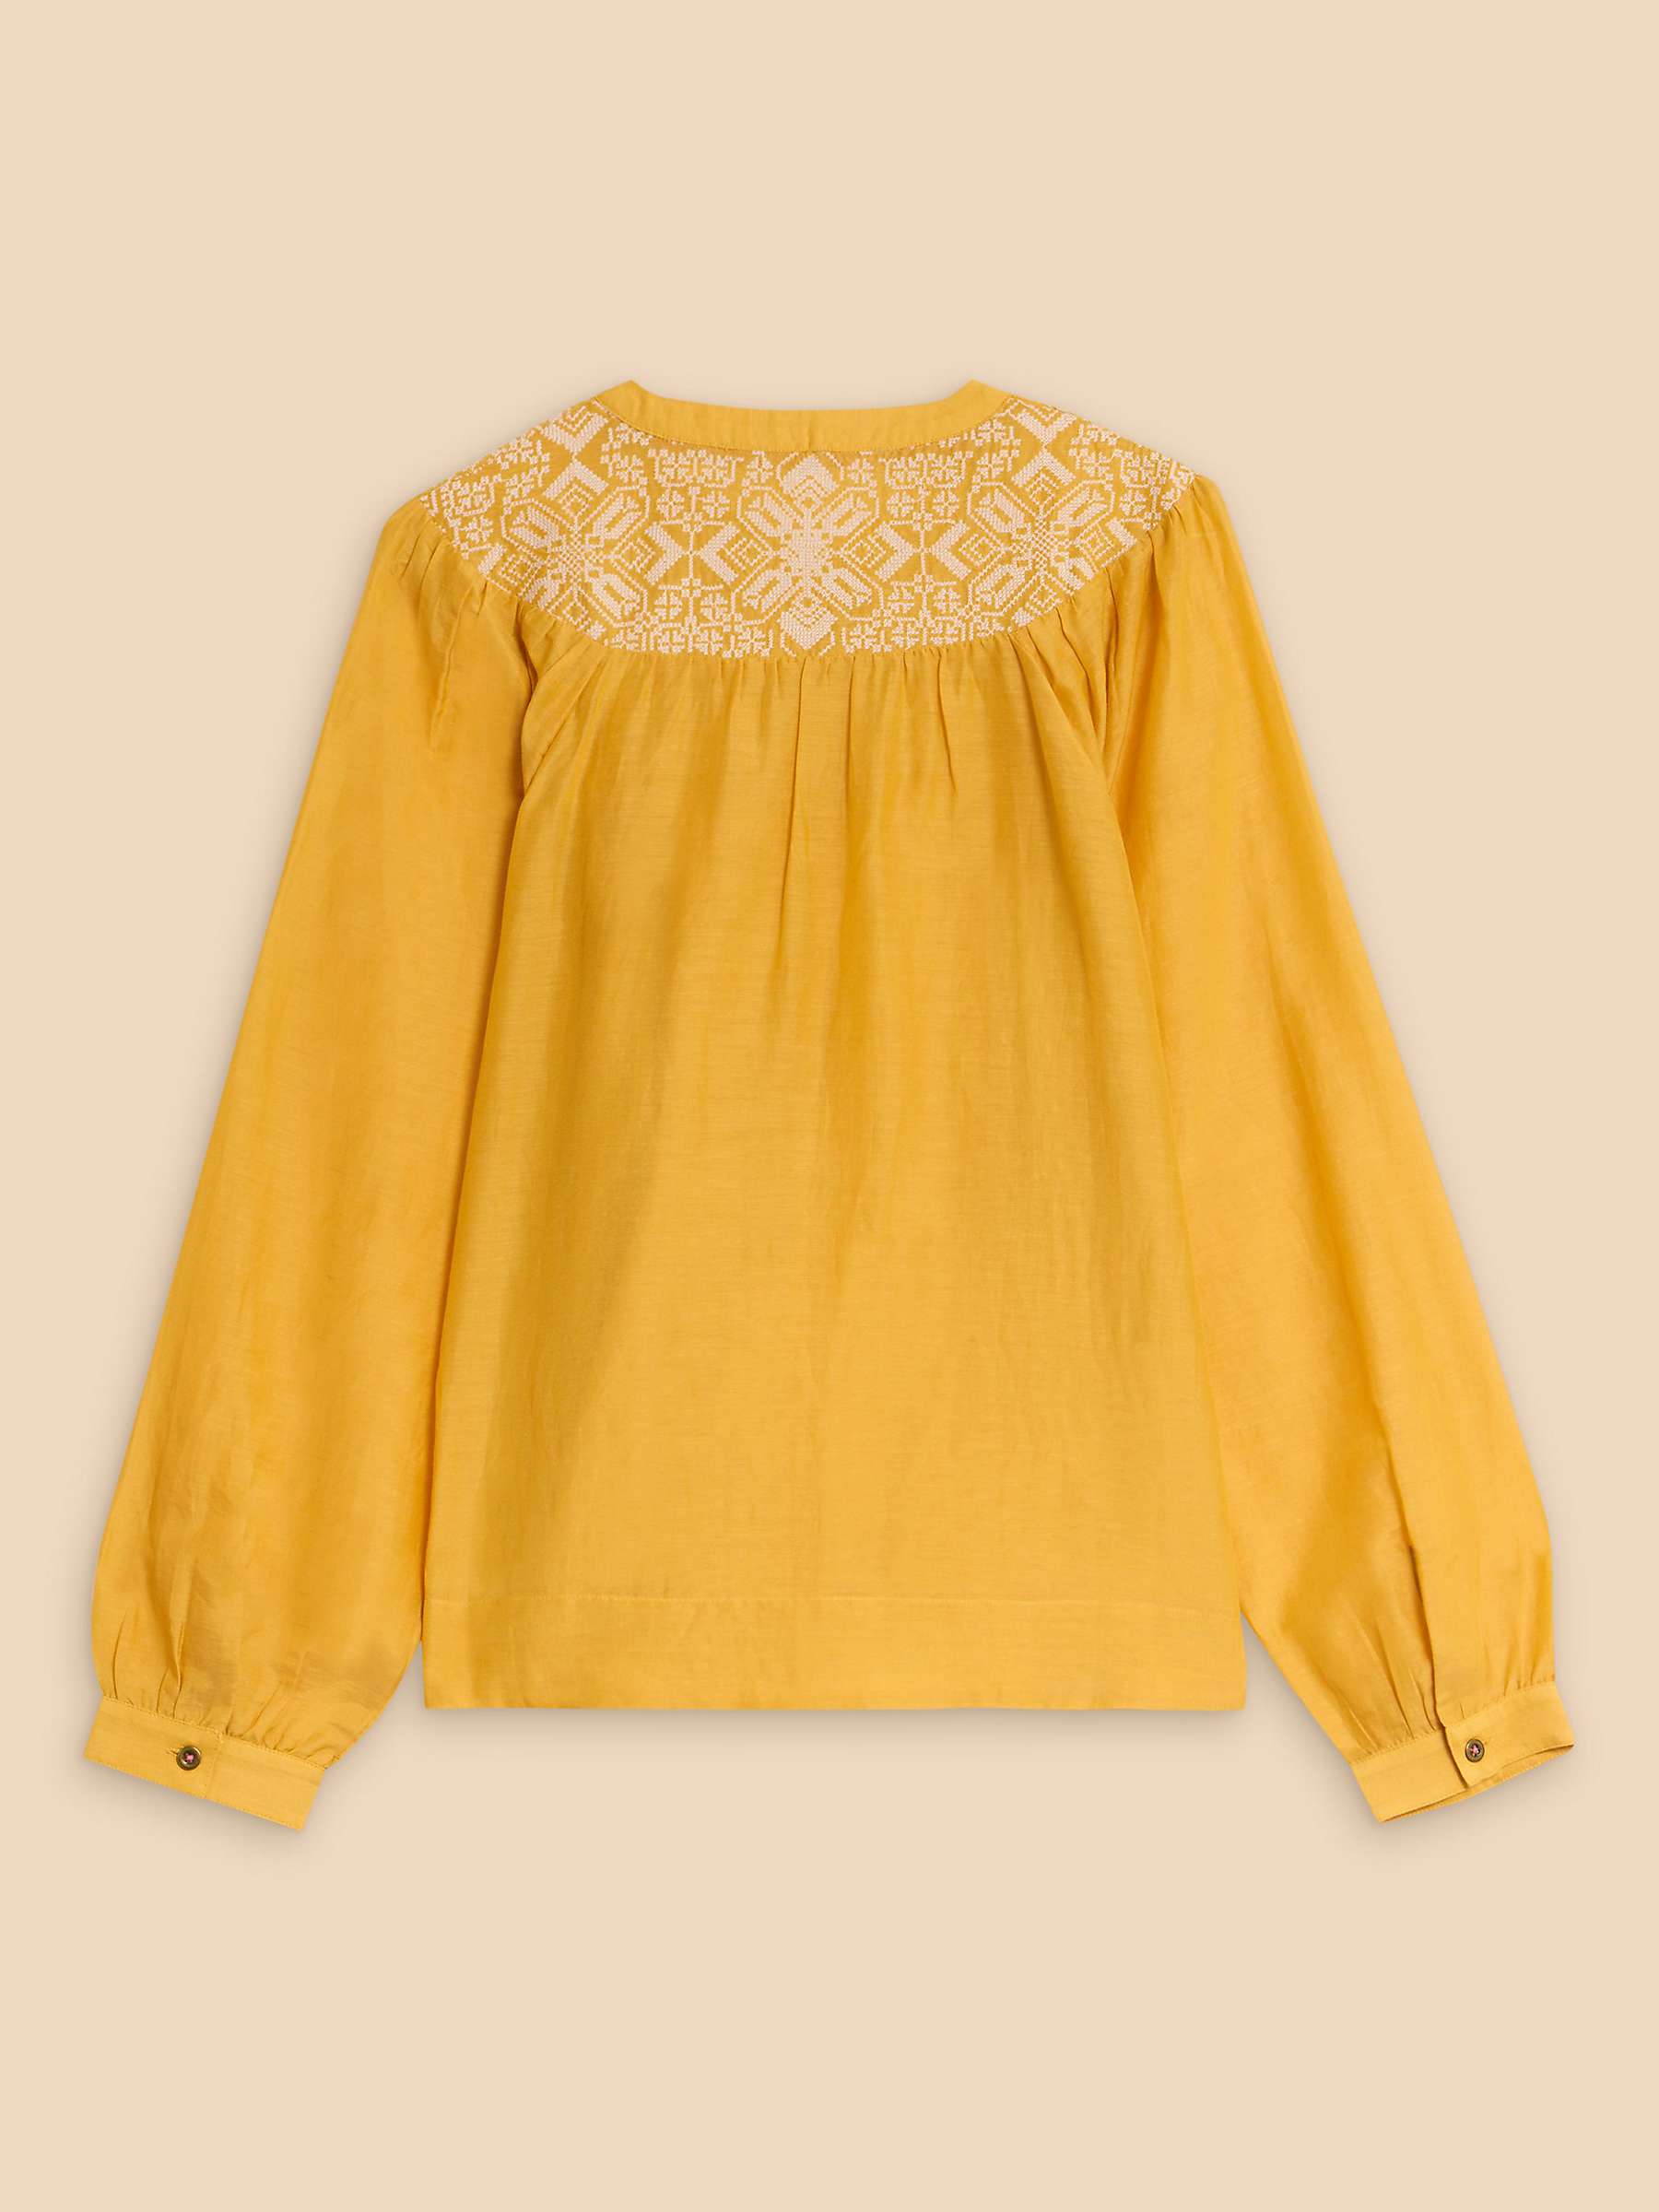 Buy White Stuff Rose Cotton Silk Top, Chartreuse/Multi Online at johnlewis.com